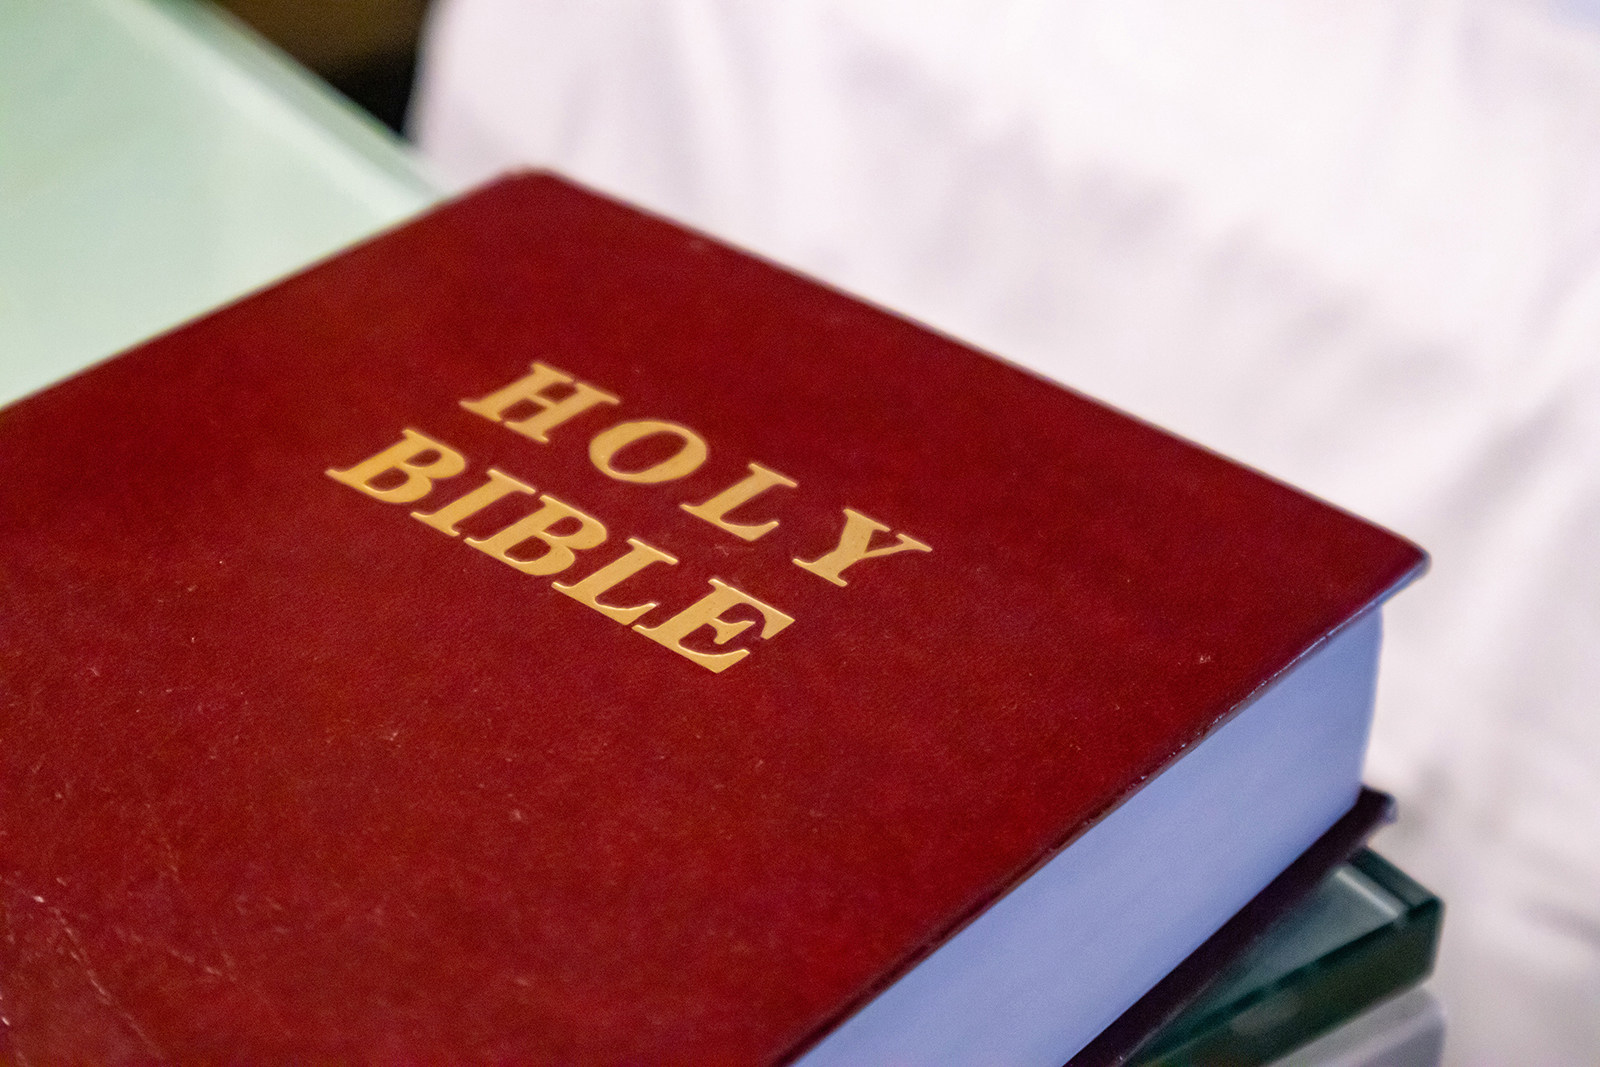 The Bible was removed from elementary and middle school shelves in a Utah school district after a parent filed a complaint under the state’s new law prohibiting “pornographic or indecent” material in schools. Photo: TNS